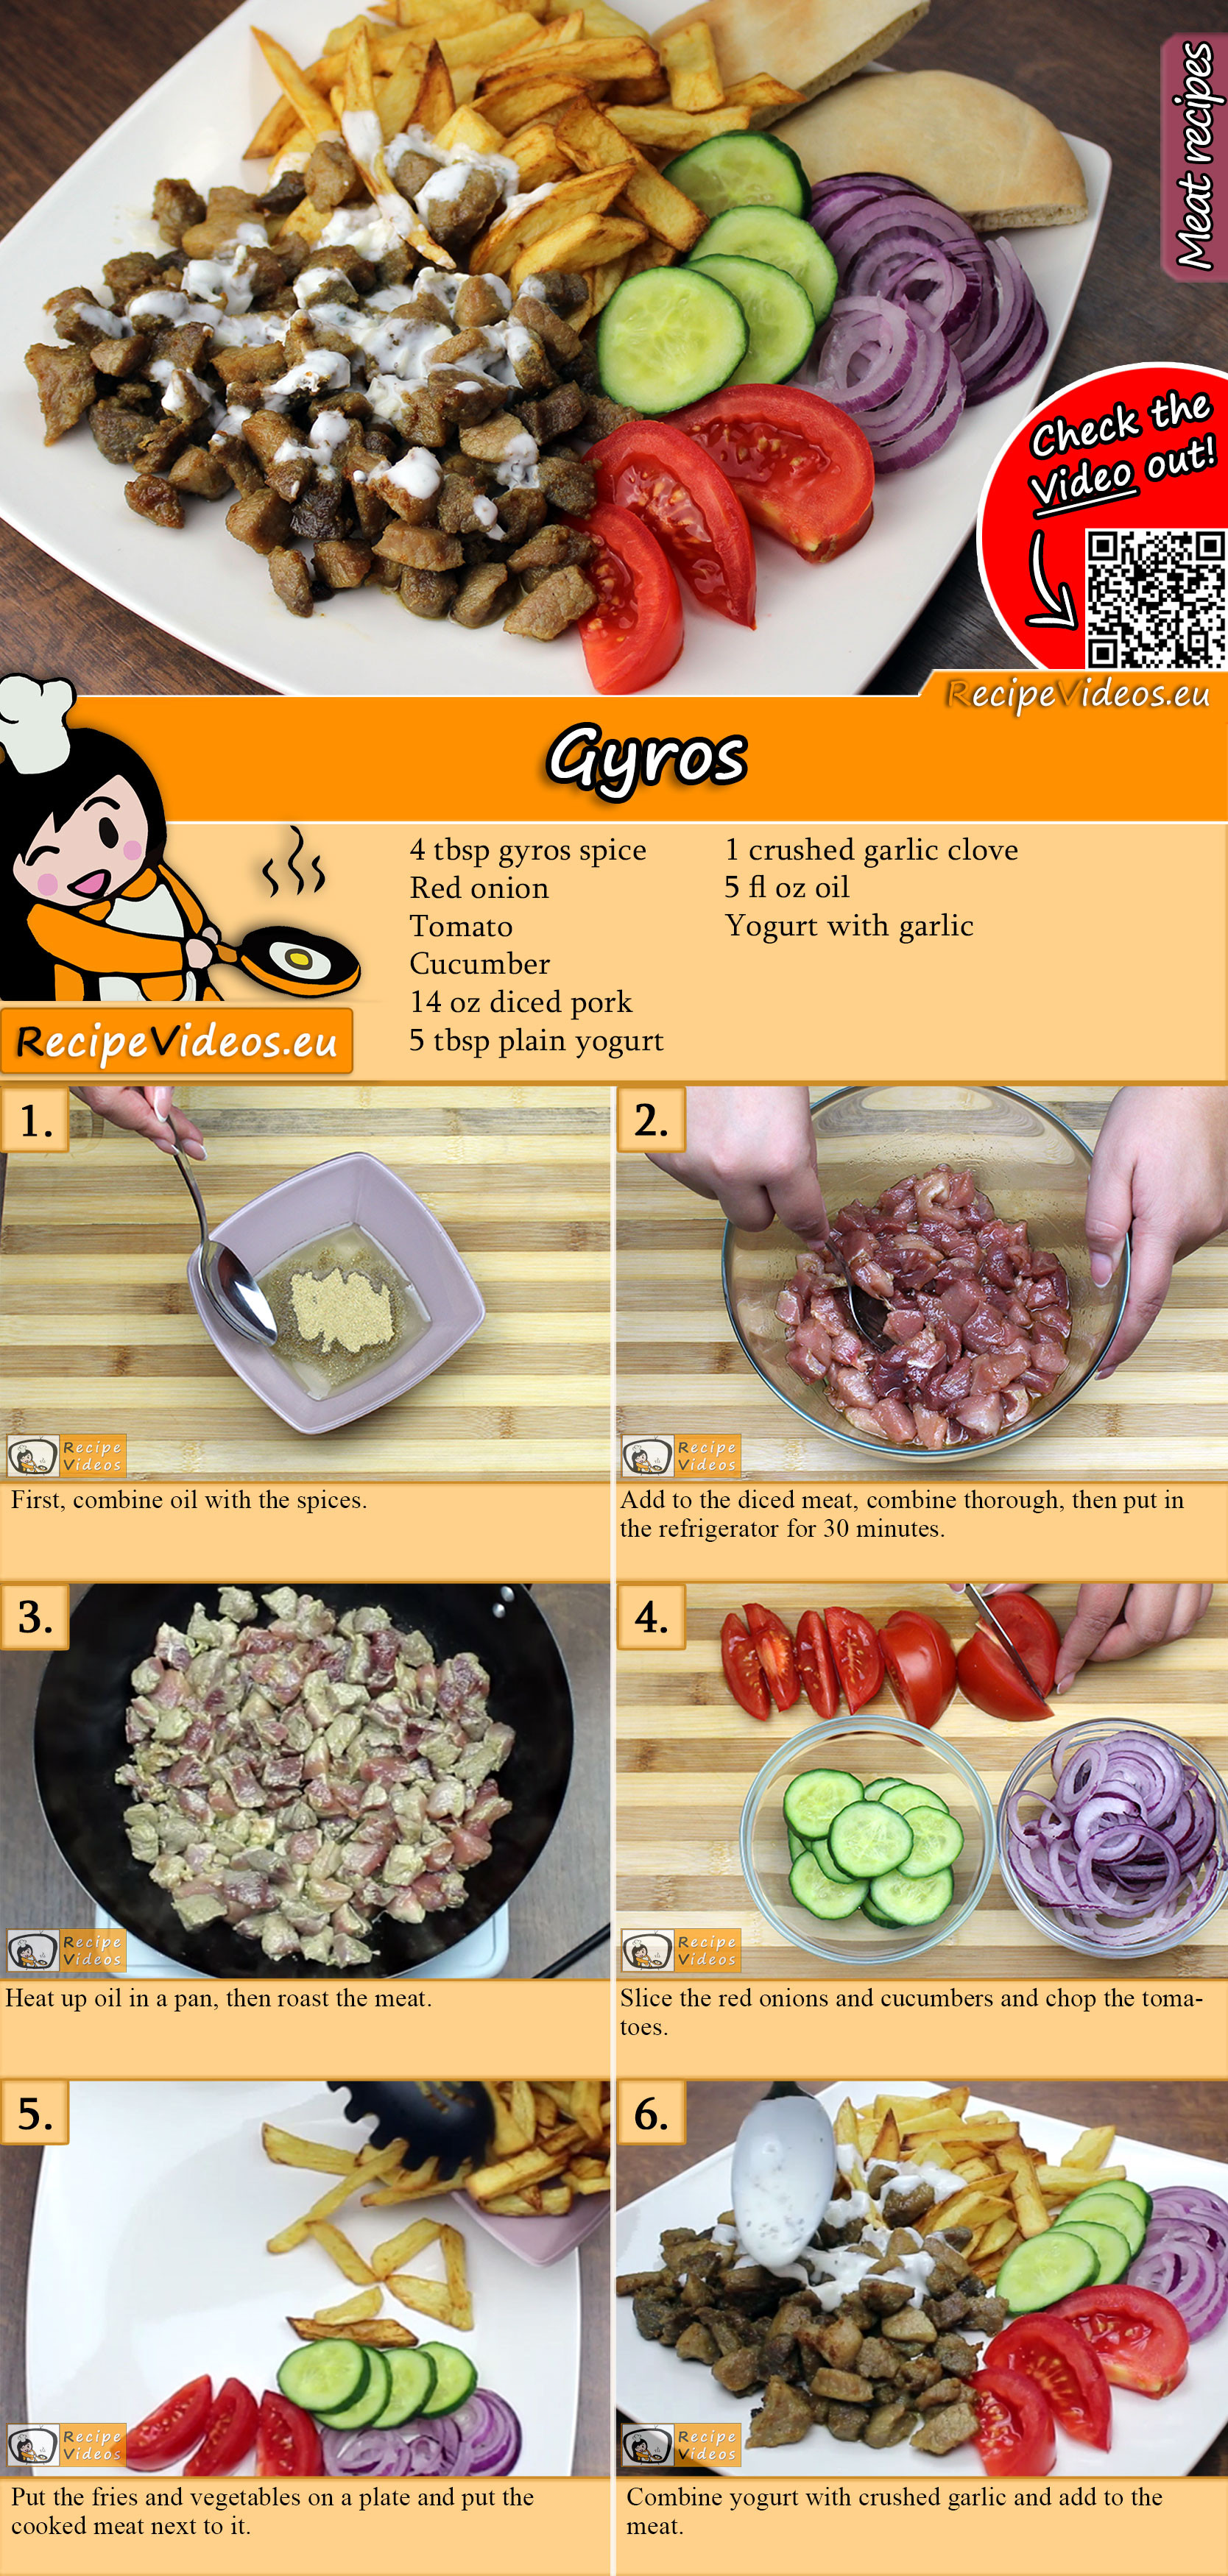 Gyros recipe with video